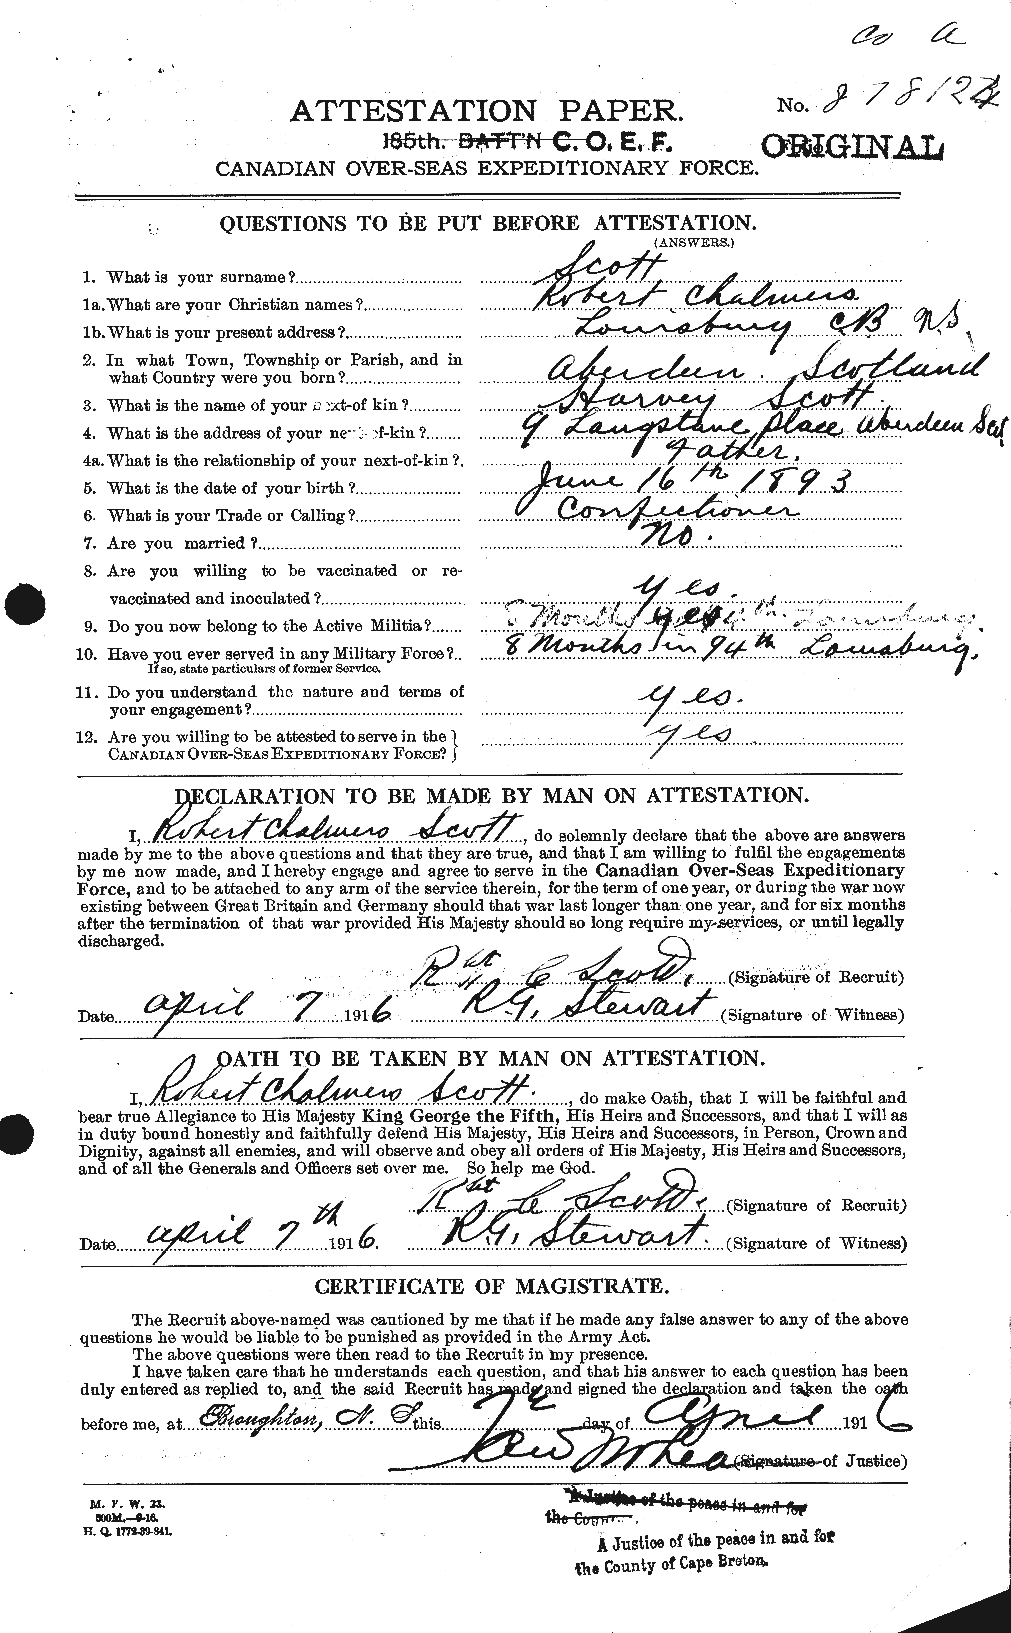 Personnel Records of the First World War - CEF 089210a